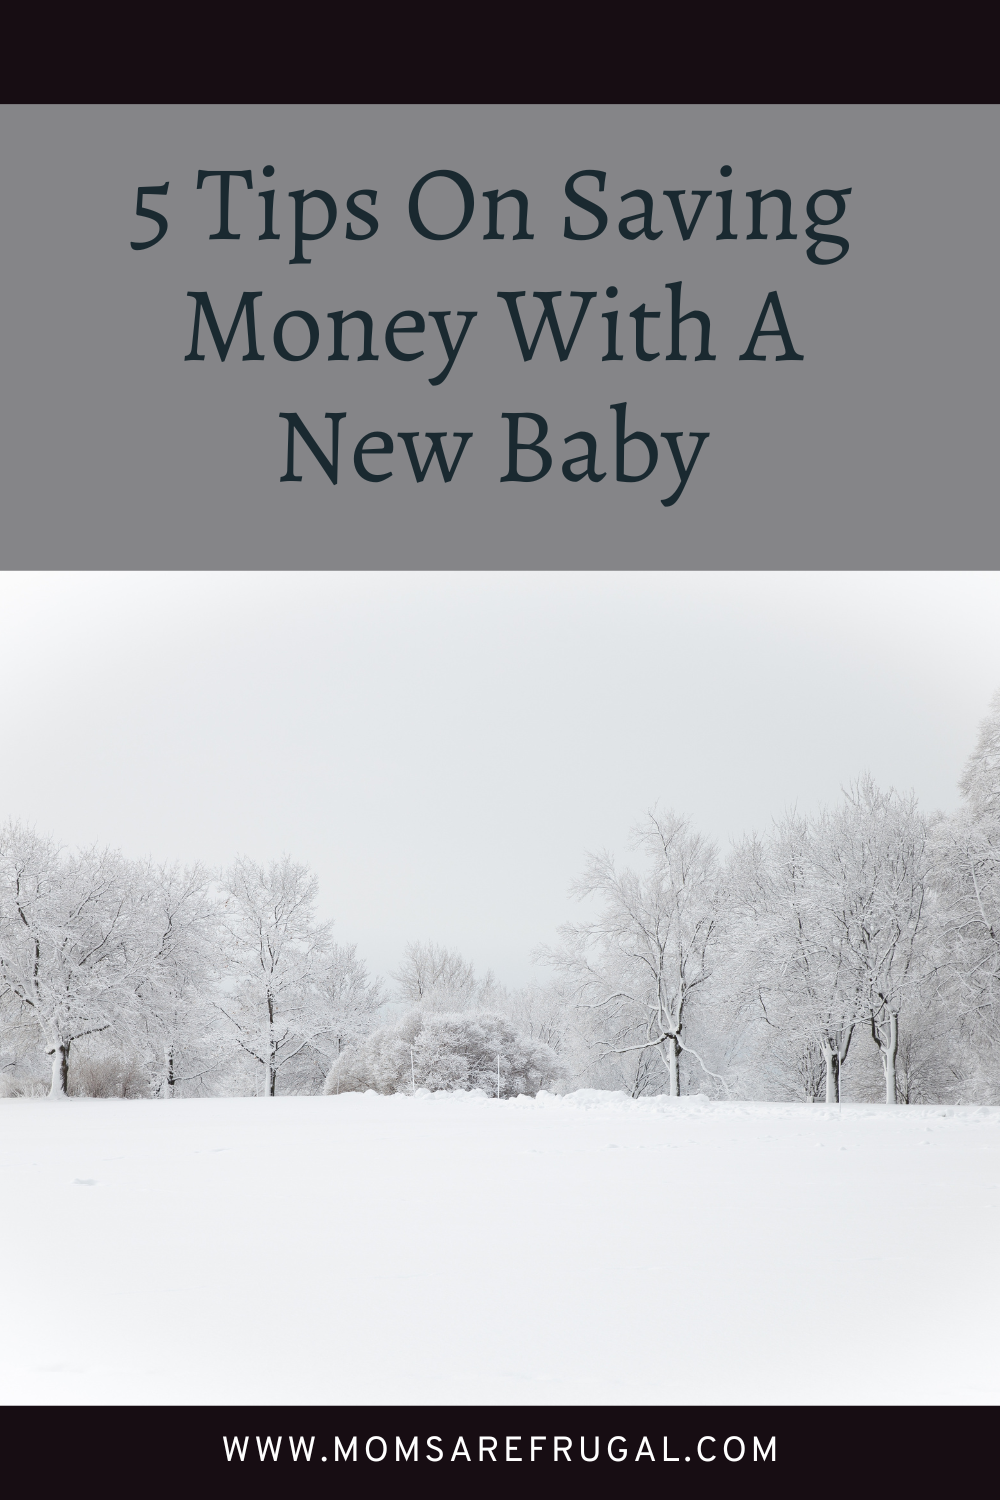 5 Tips to Saving Money With A New Baby